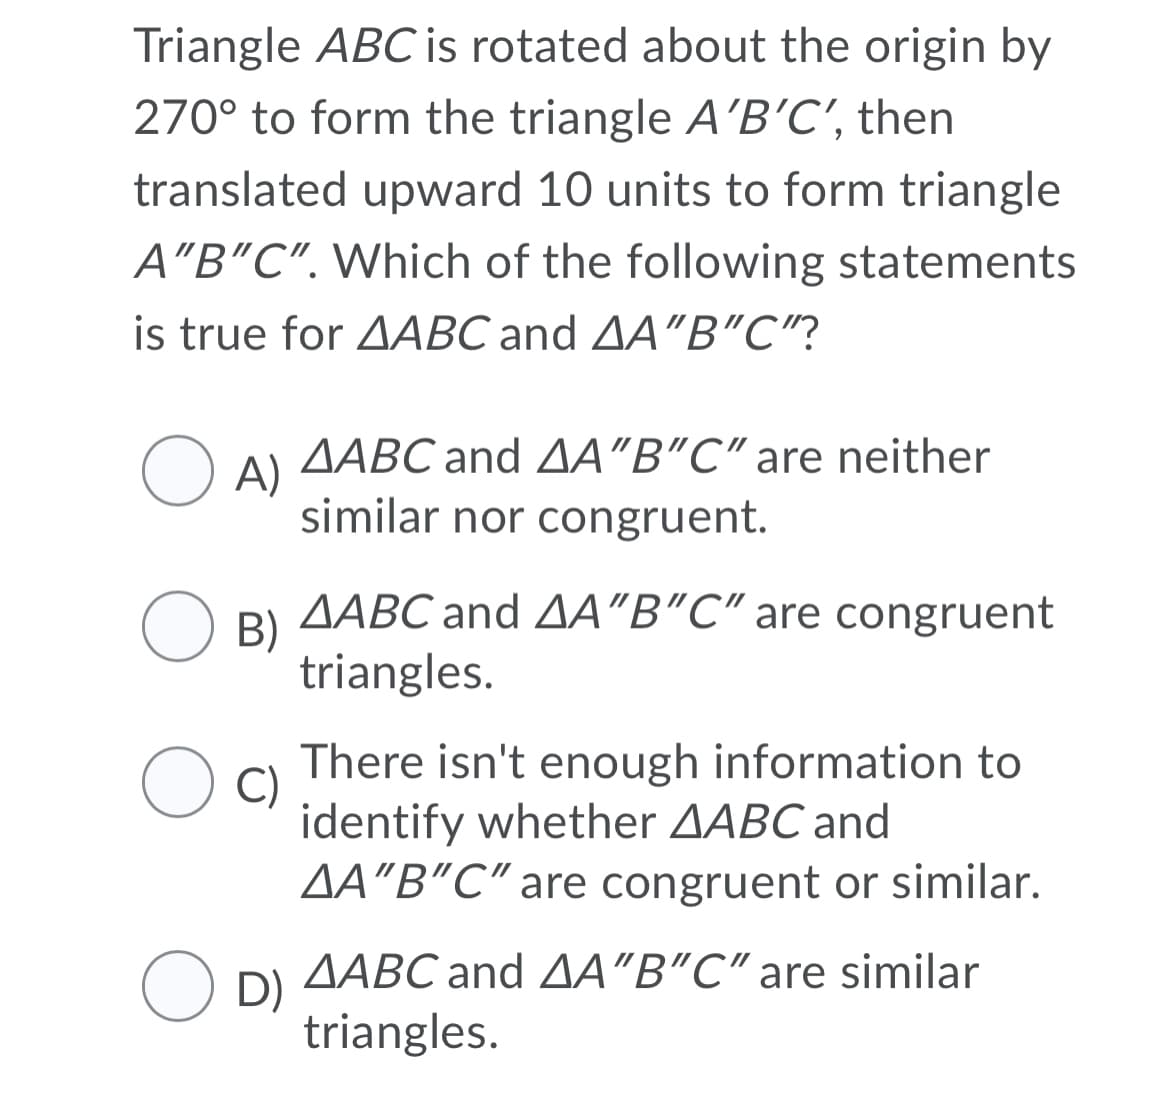 Triangle ABC is rotated about the origin by
270° to form the triangle A'B'C', then
translated upward 10 units to form triangle
A"B"C". Which of the following statements
is true for AABC and AA"B"C"?
AABC and AA"B"C" are neither
O A)
similar nor congruent.
AABC and AA"B"C" are congruent
O B)
triangles.
There isn't enough information to
C)
identify whether AABC and
AA"B"C" are congruent or similar.
AABC and AA"B"C" are similar
O D)
triangles.
